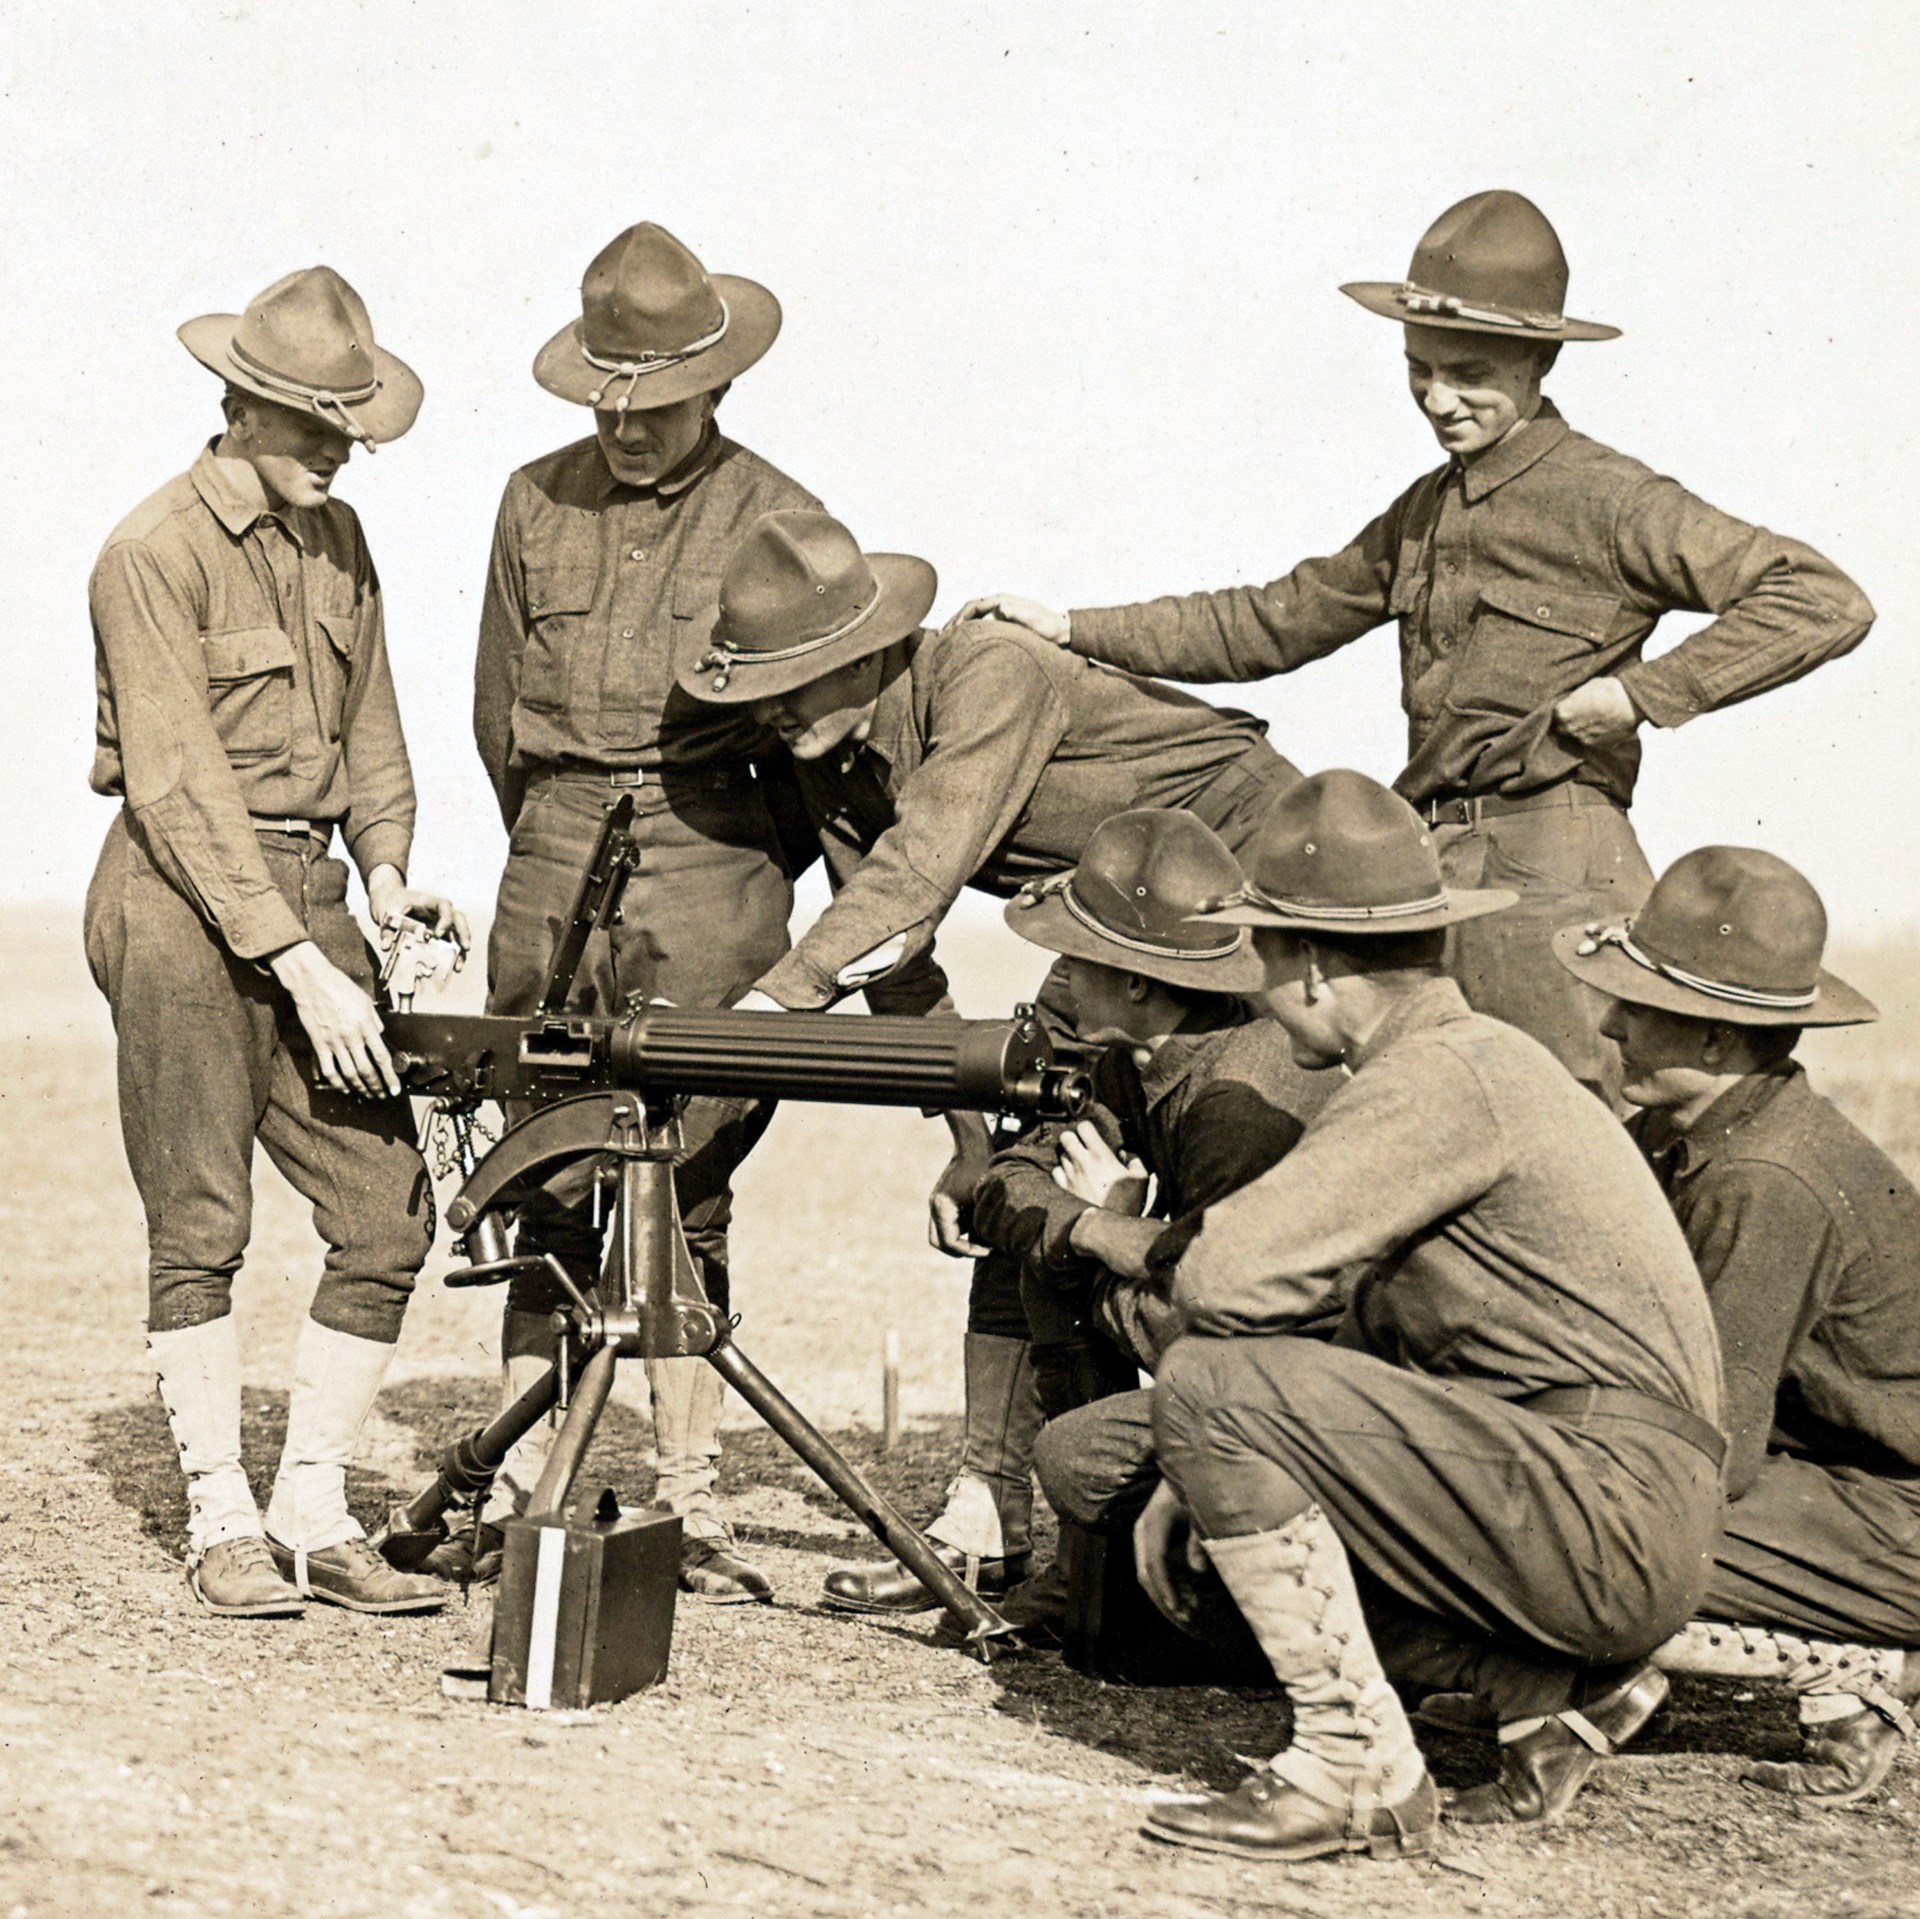 The Vickers Machine Gun was the predominant forward-firing firearm on most Allied combat aircraft. The Colt-made U.S. M1915 Vickers .30-cal. was used for training in the U.S., and many of the aircraft guns were used by both French and American squadrons. This is a standard infantry gun, seen at Ellington Field near Houston, Texas, during the summer of 1918. N.A.R.A. photograph.